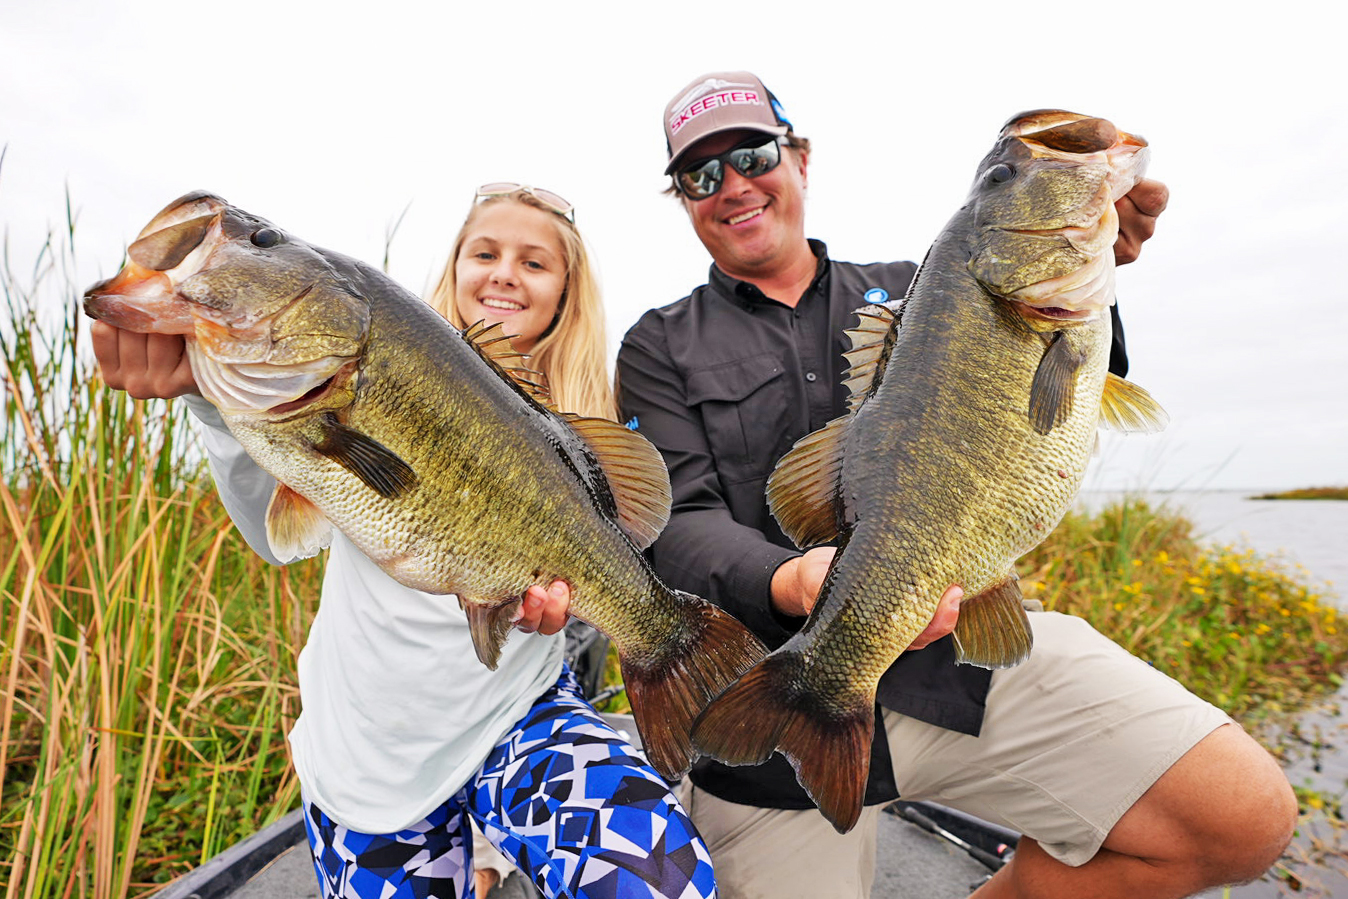 Man and female holding up large Bass caught fishing in Florida in early spawn period